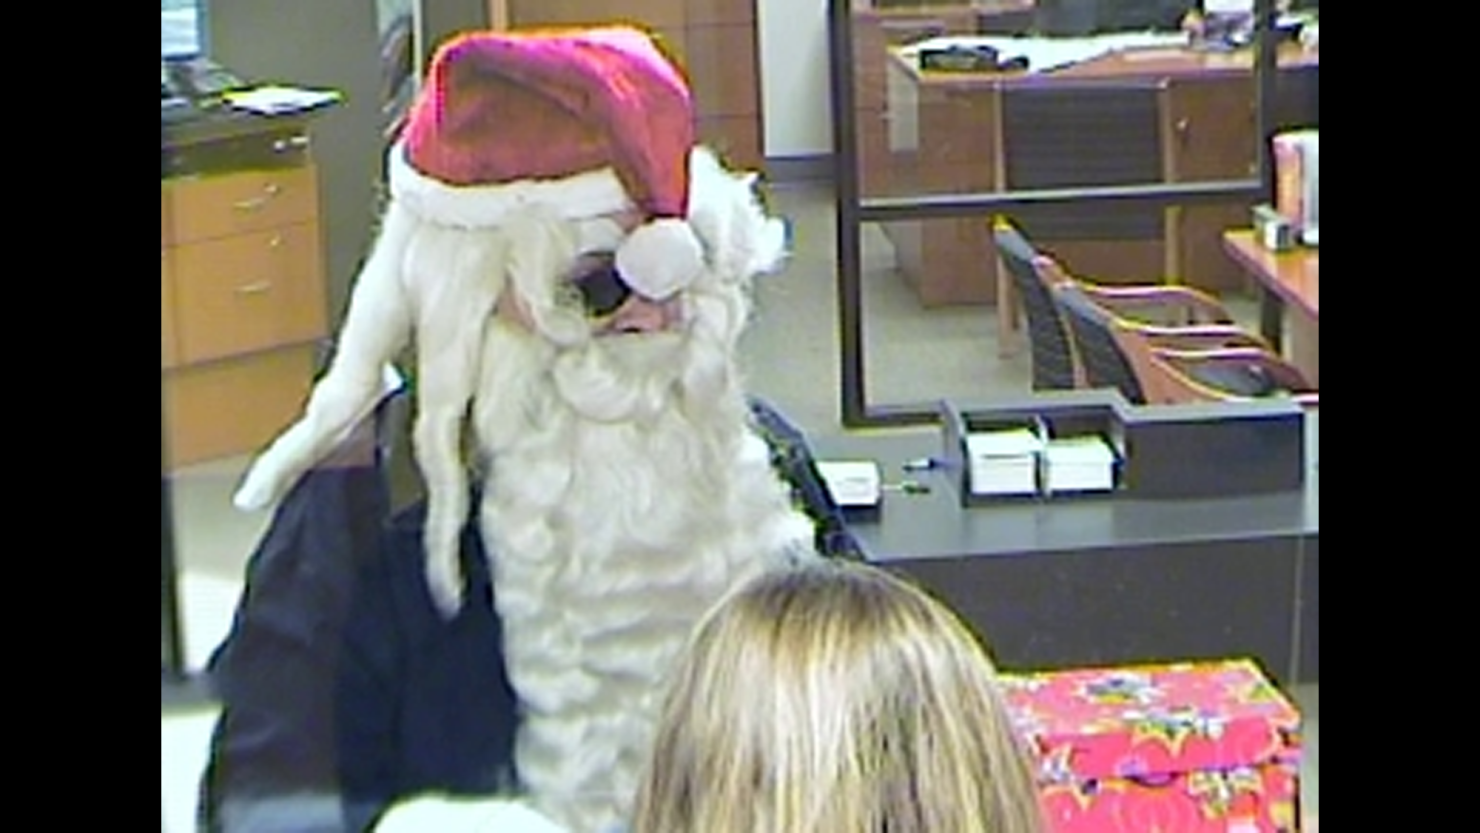 A bank robber wearing a Santa hat and beard is seen on video surveillance at a SunTrust Bank in Port Orange, Florida, on Monday, December 23.